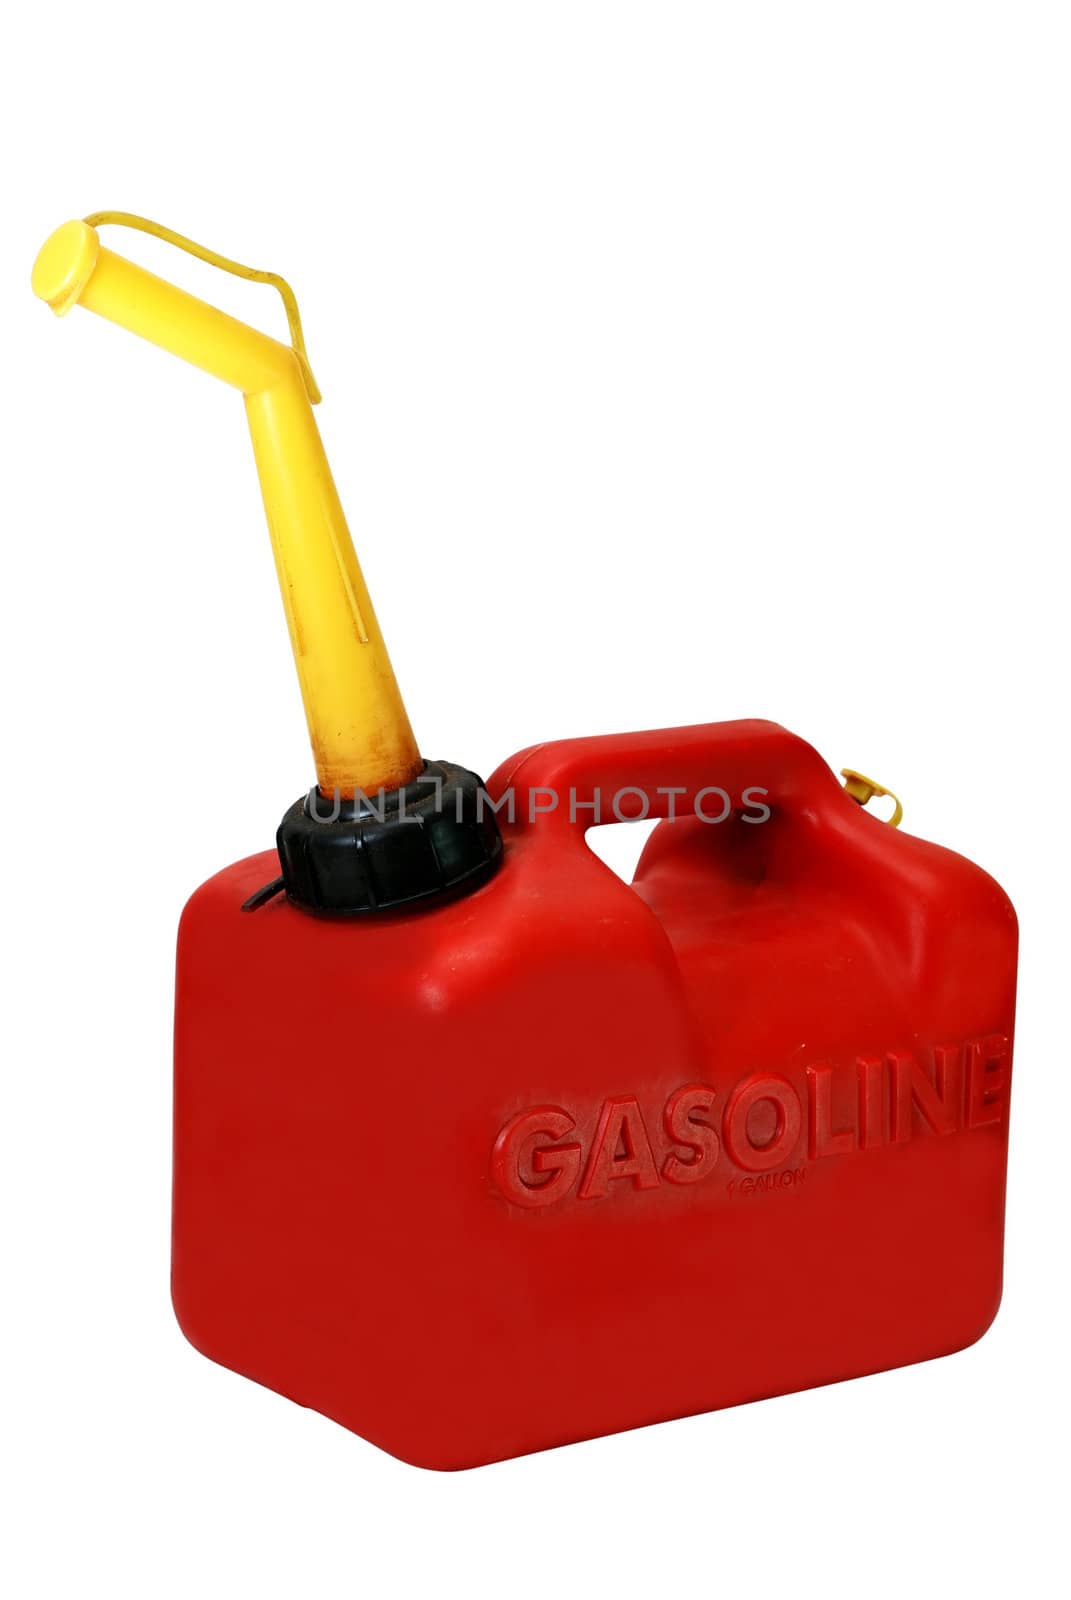 Gasoline can isolated on white background with clipping path.